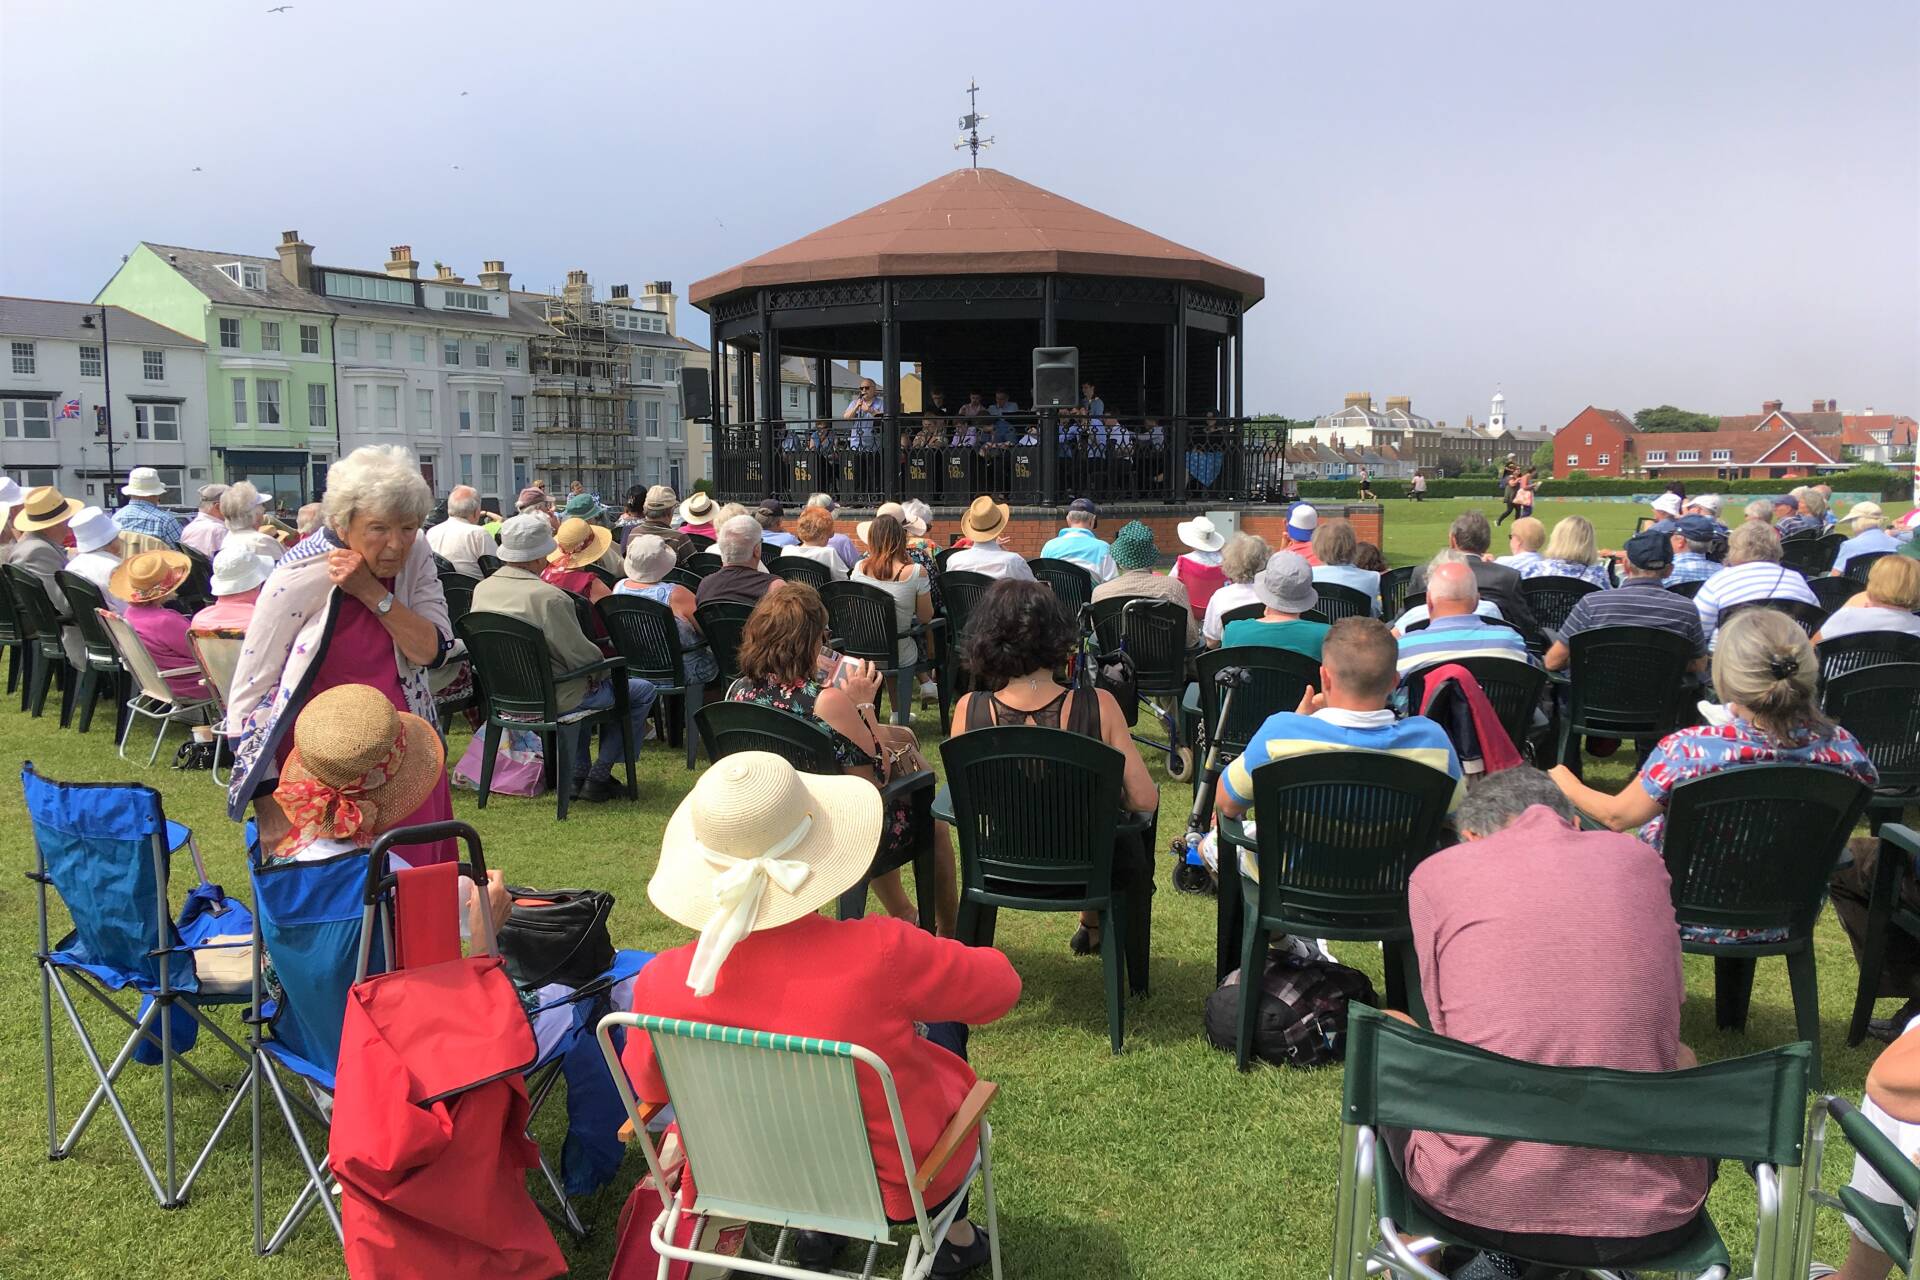 Musicians playing at a bandstand on a greensward, audience looking on